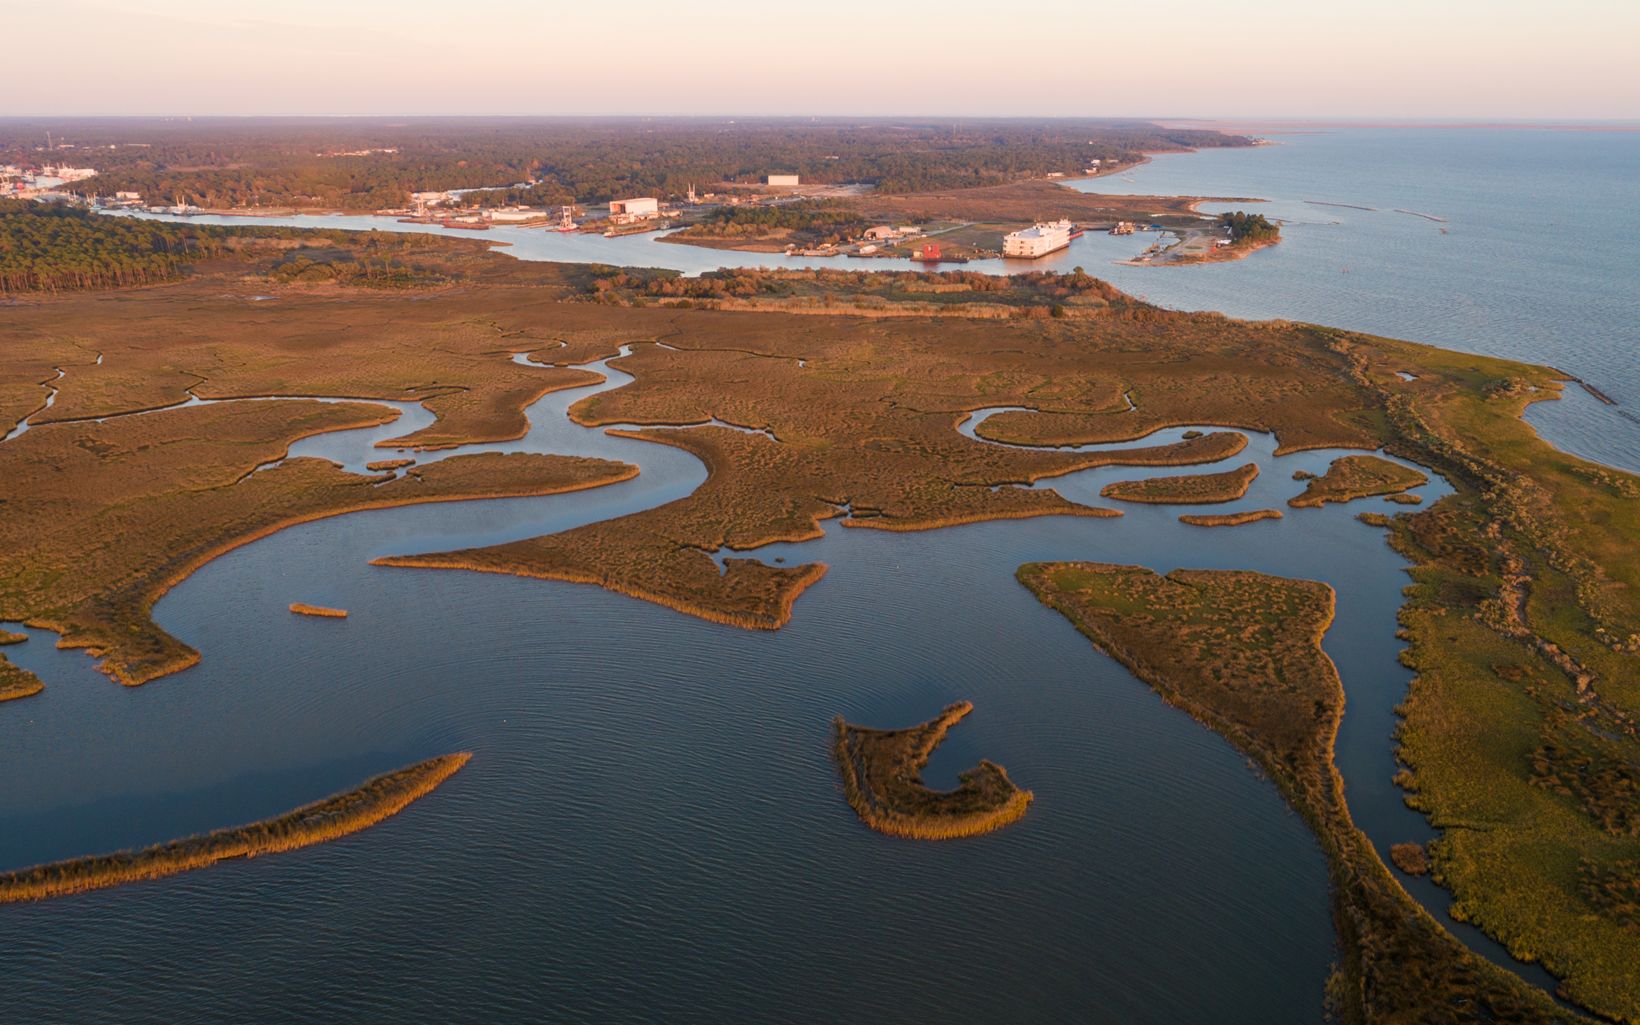 Aerial view of a large salt marsh with many channels winding through it, with the ocean on the right and forested landscape in the distance.